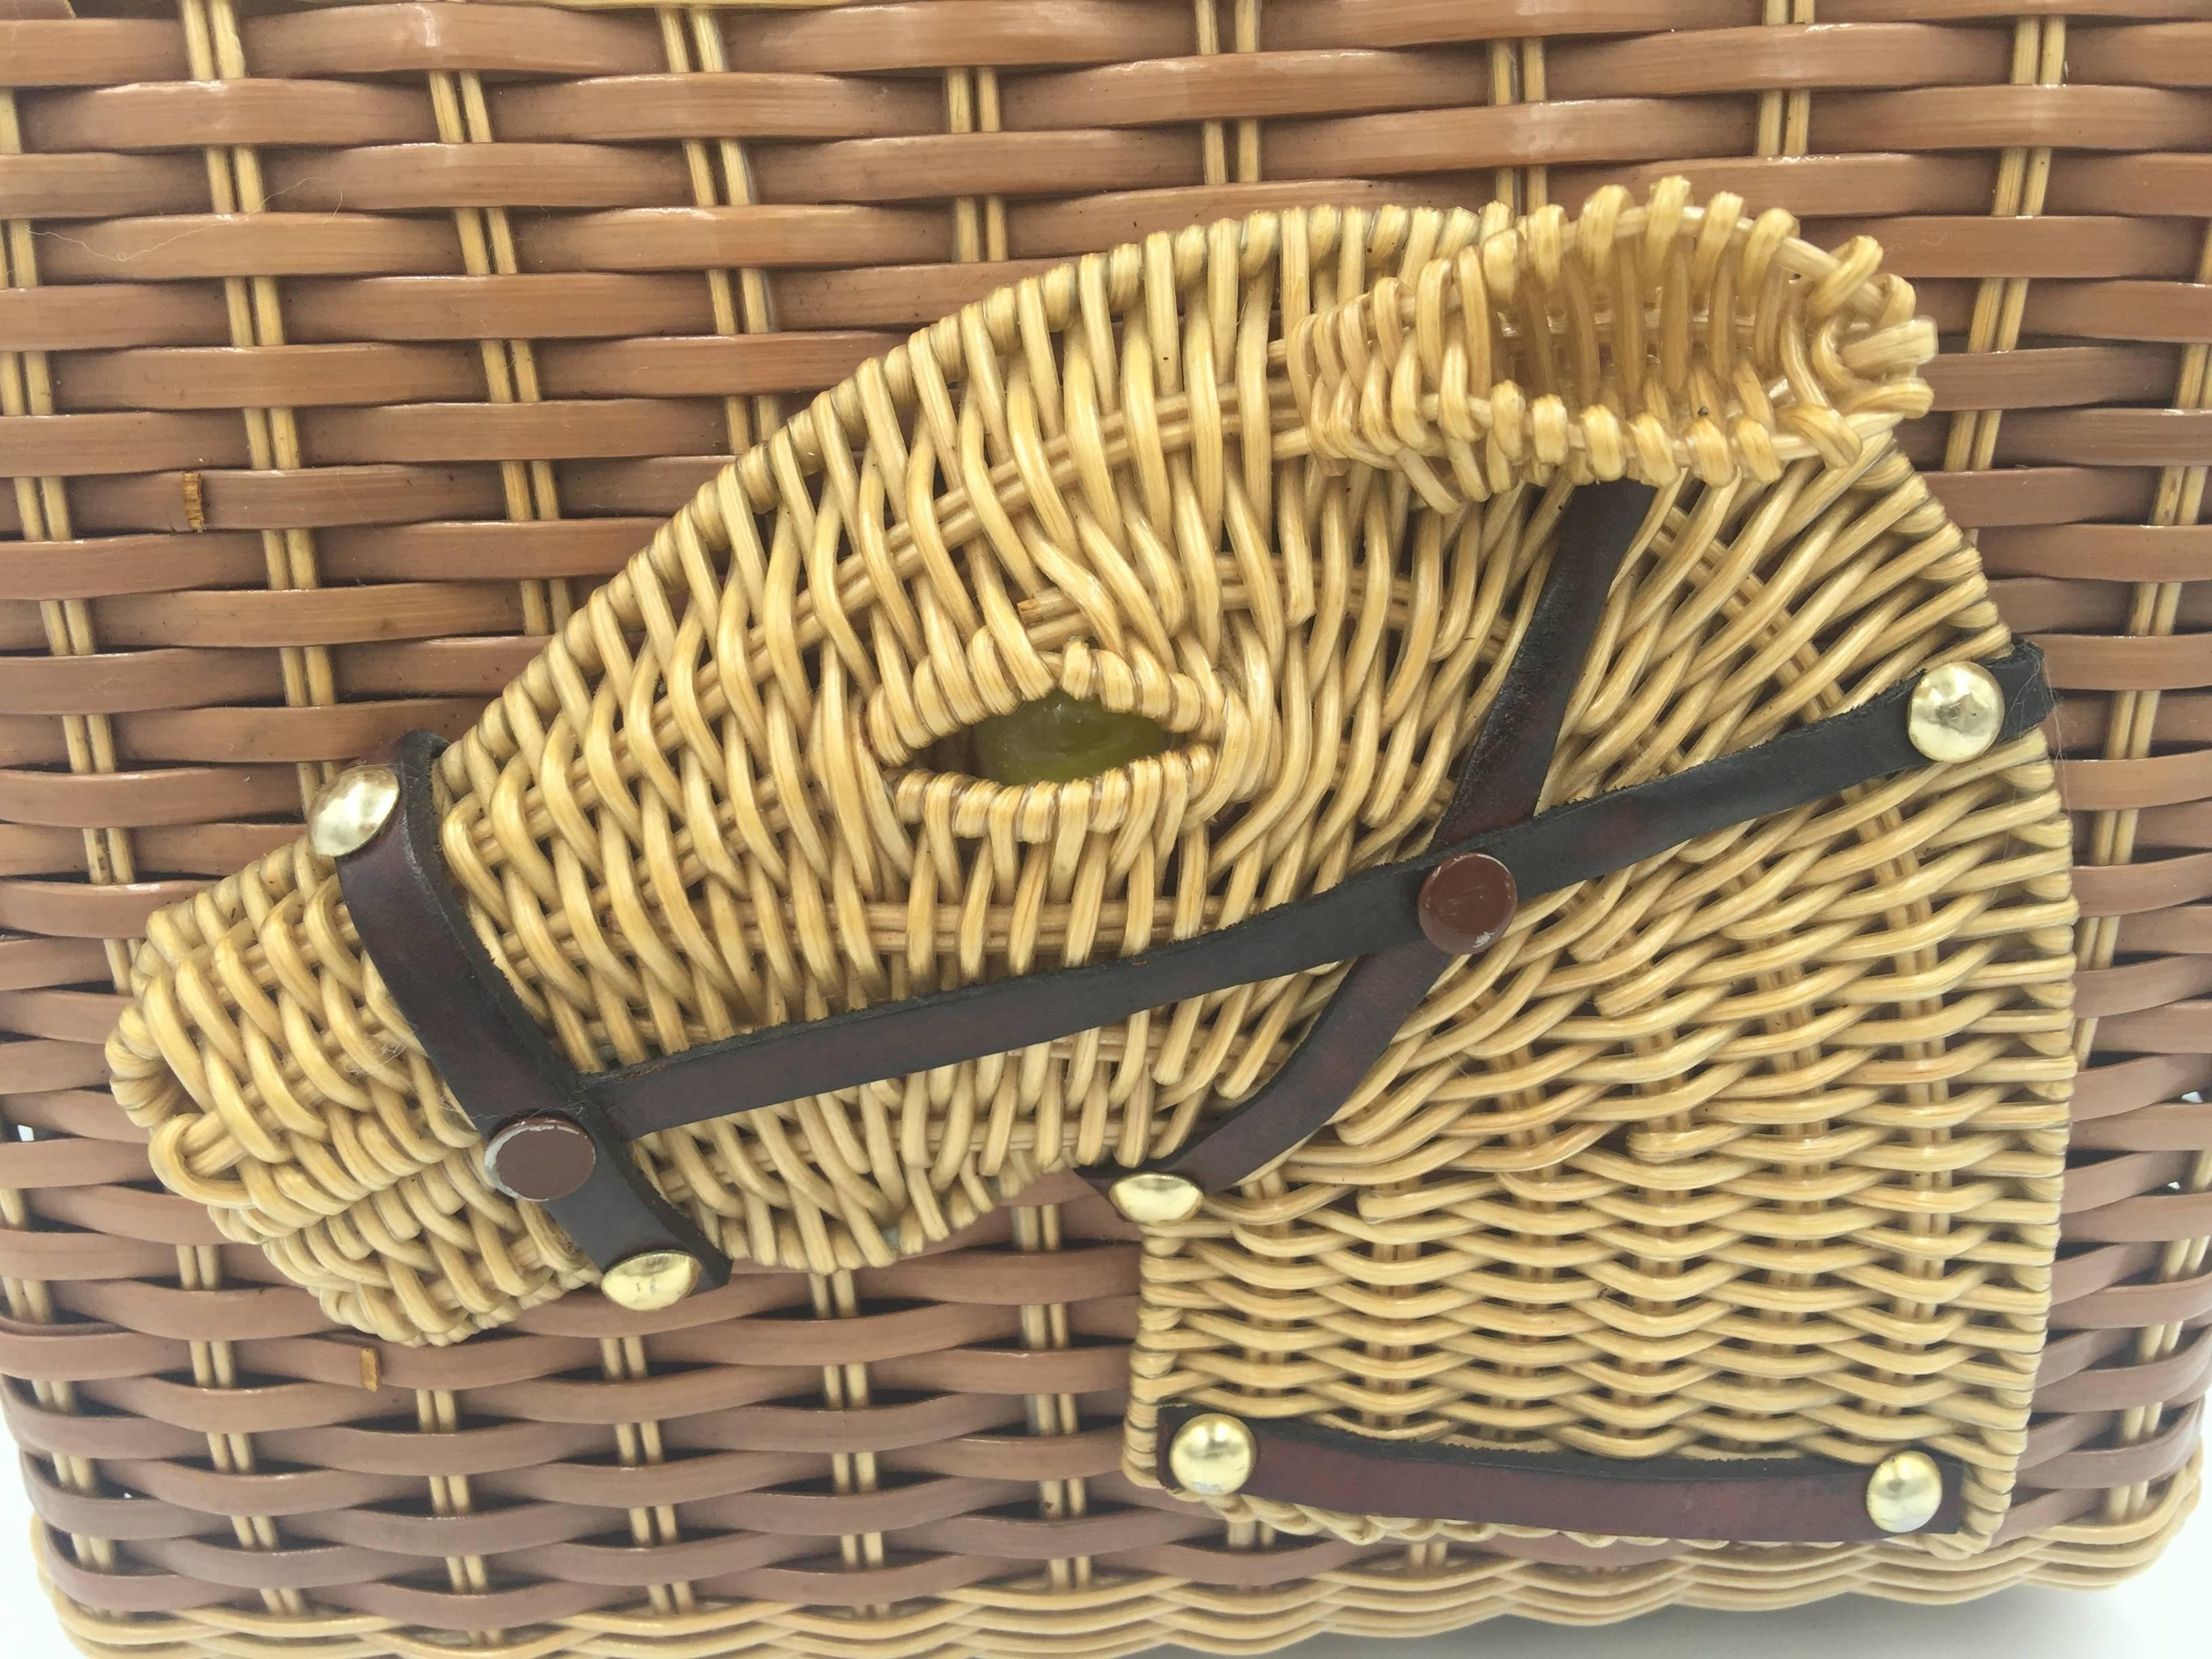 Rare and wonderful vintage wicker bag by Stylecraft of Miami. 

The wicker is coated for a smooth finish.

Here, a 3-dimensional portrait of a regal looking horse is rendered in wicker, leather, and brass tacks.  The inset eye is made of clear